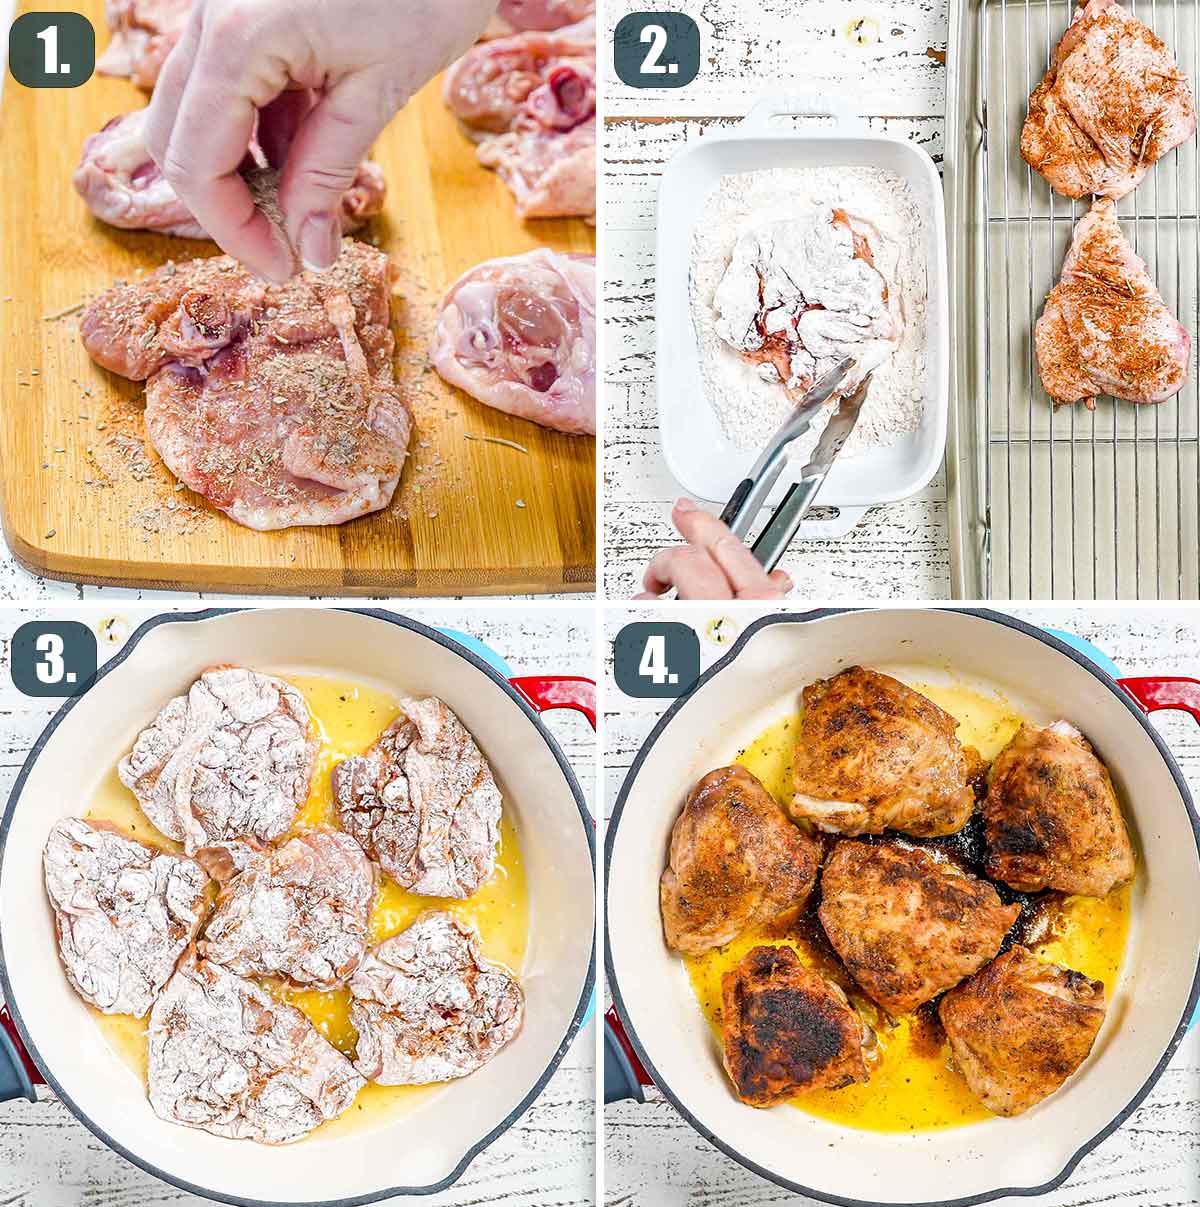 process shots showing how to cook chicken thighs for smothered chicken.